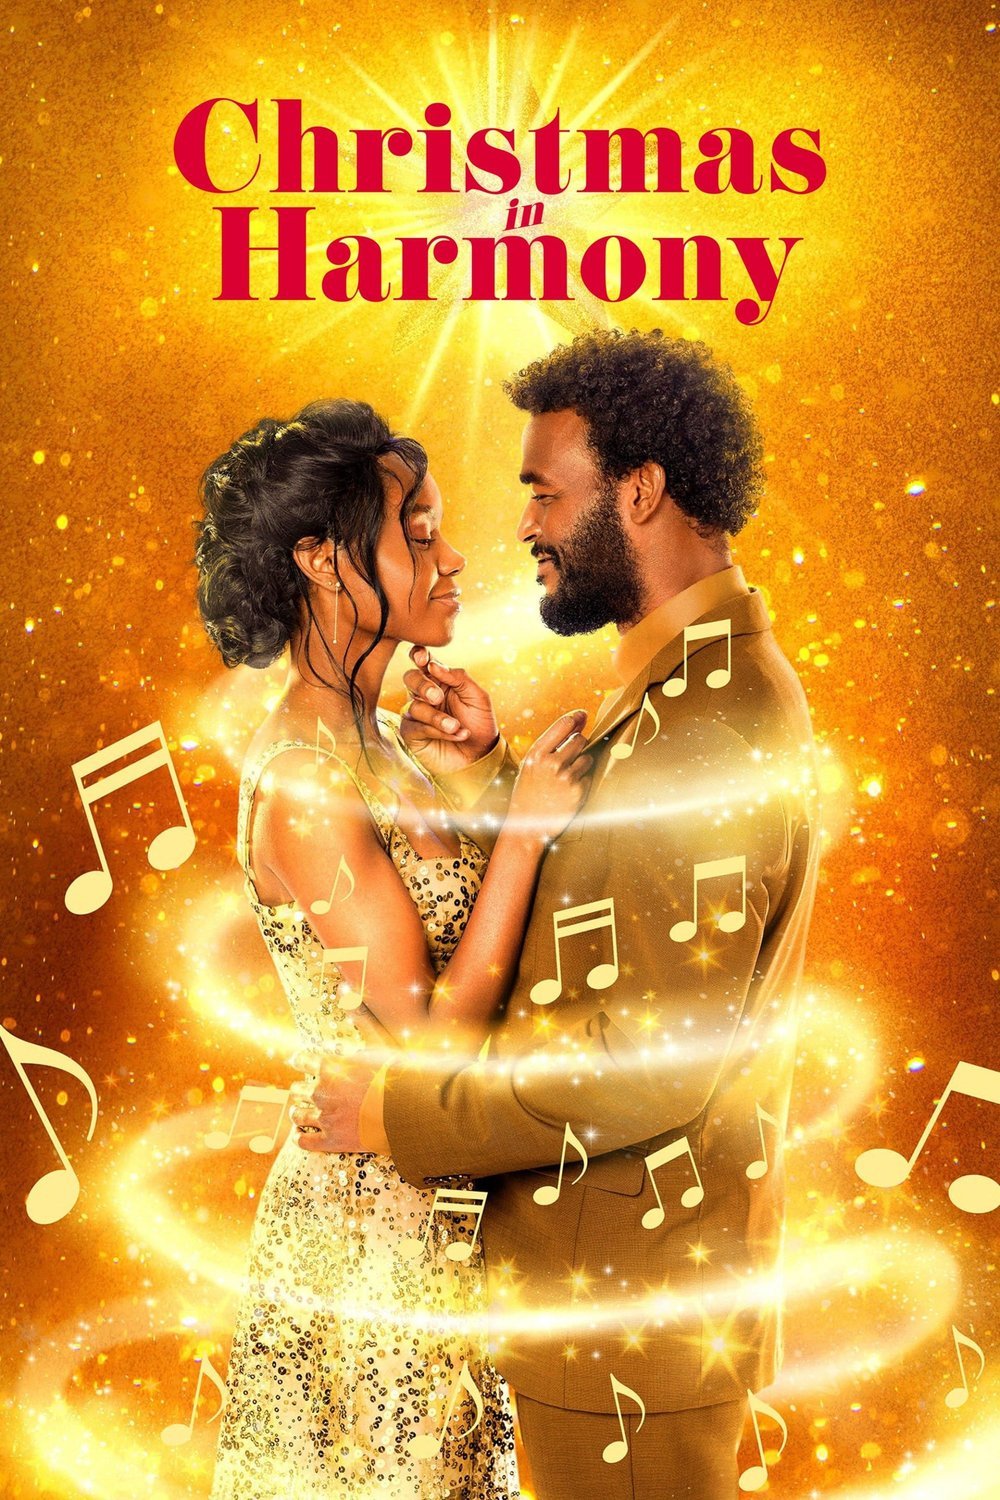 Poster of the movie Christmas in Harmony